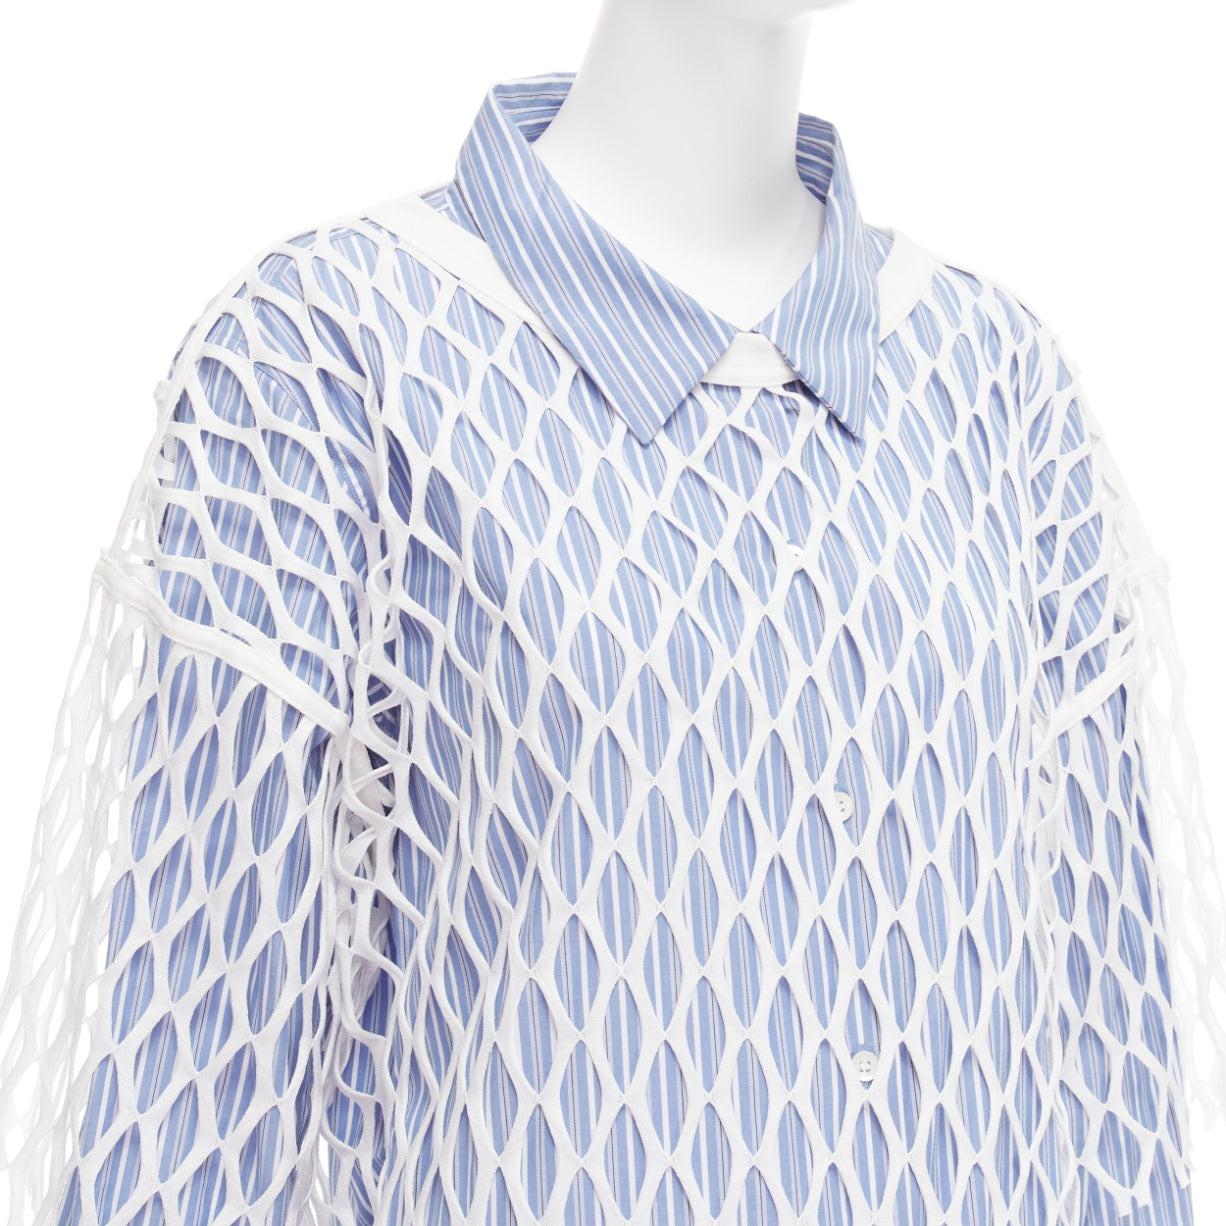 DRIES VAN NOTEN white blue cotton fishnet overlay shirt dress FR34 XS
Reference: NKLL/A00026
Brand: Dries Van Noten
Material: Cotton
Color: Blue, White
Pattern: Striped
Closure: Button
Lining: Blue Cotton
Made in: Hungary

CONDITION:
Condition: